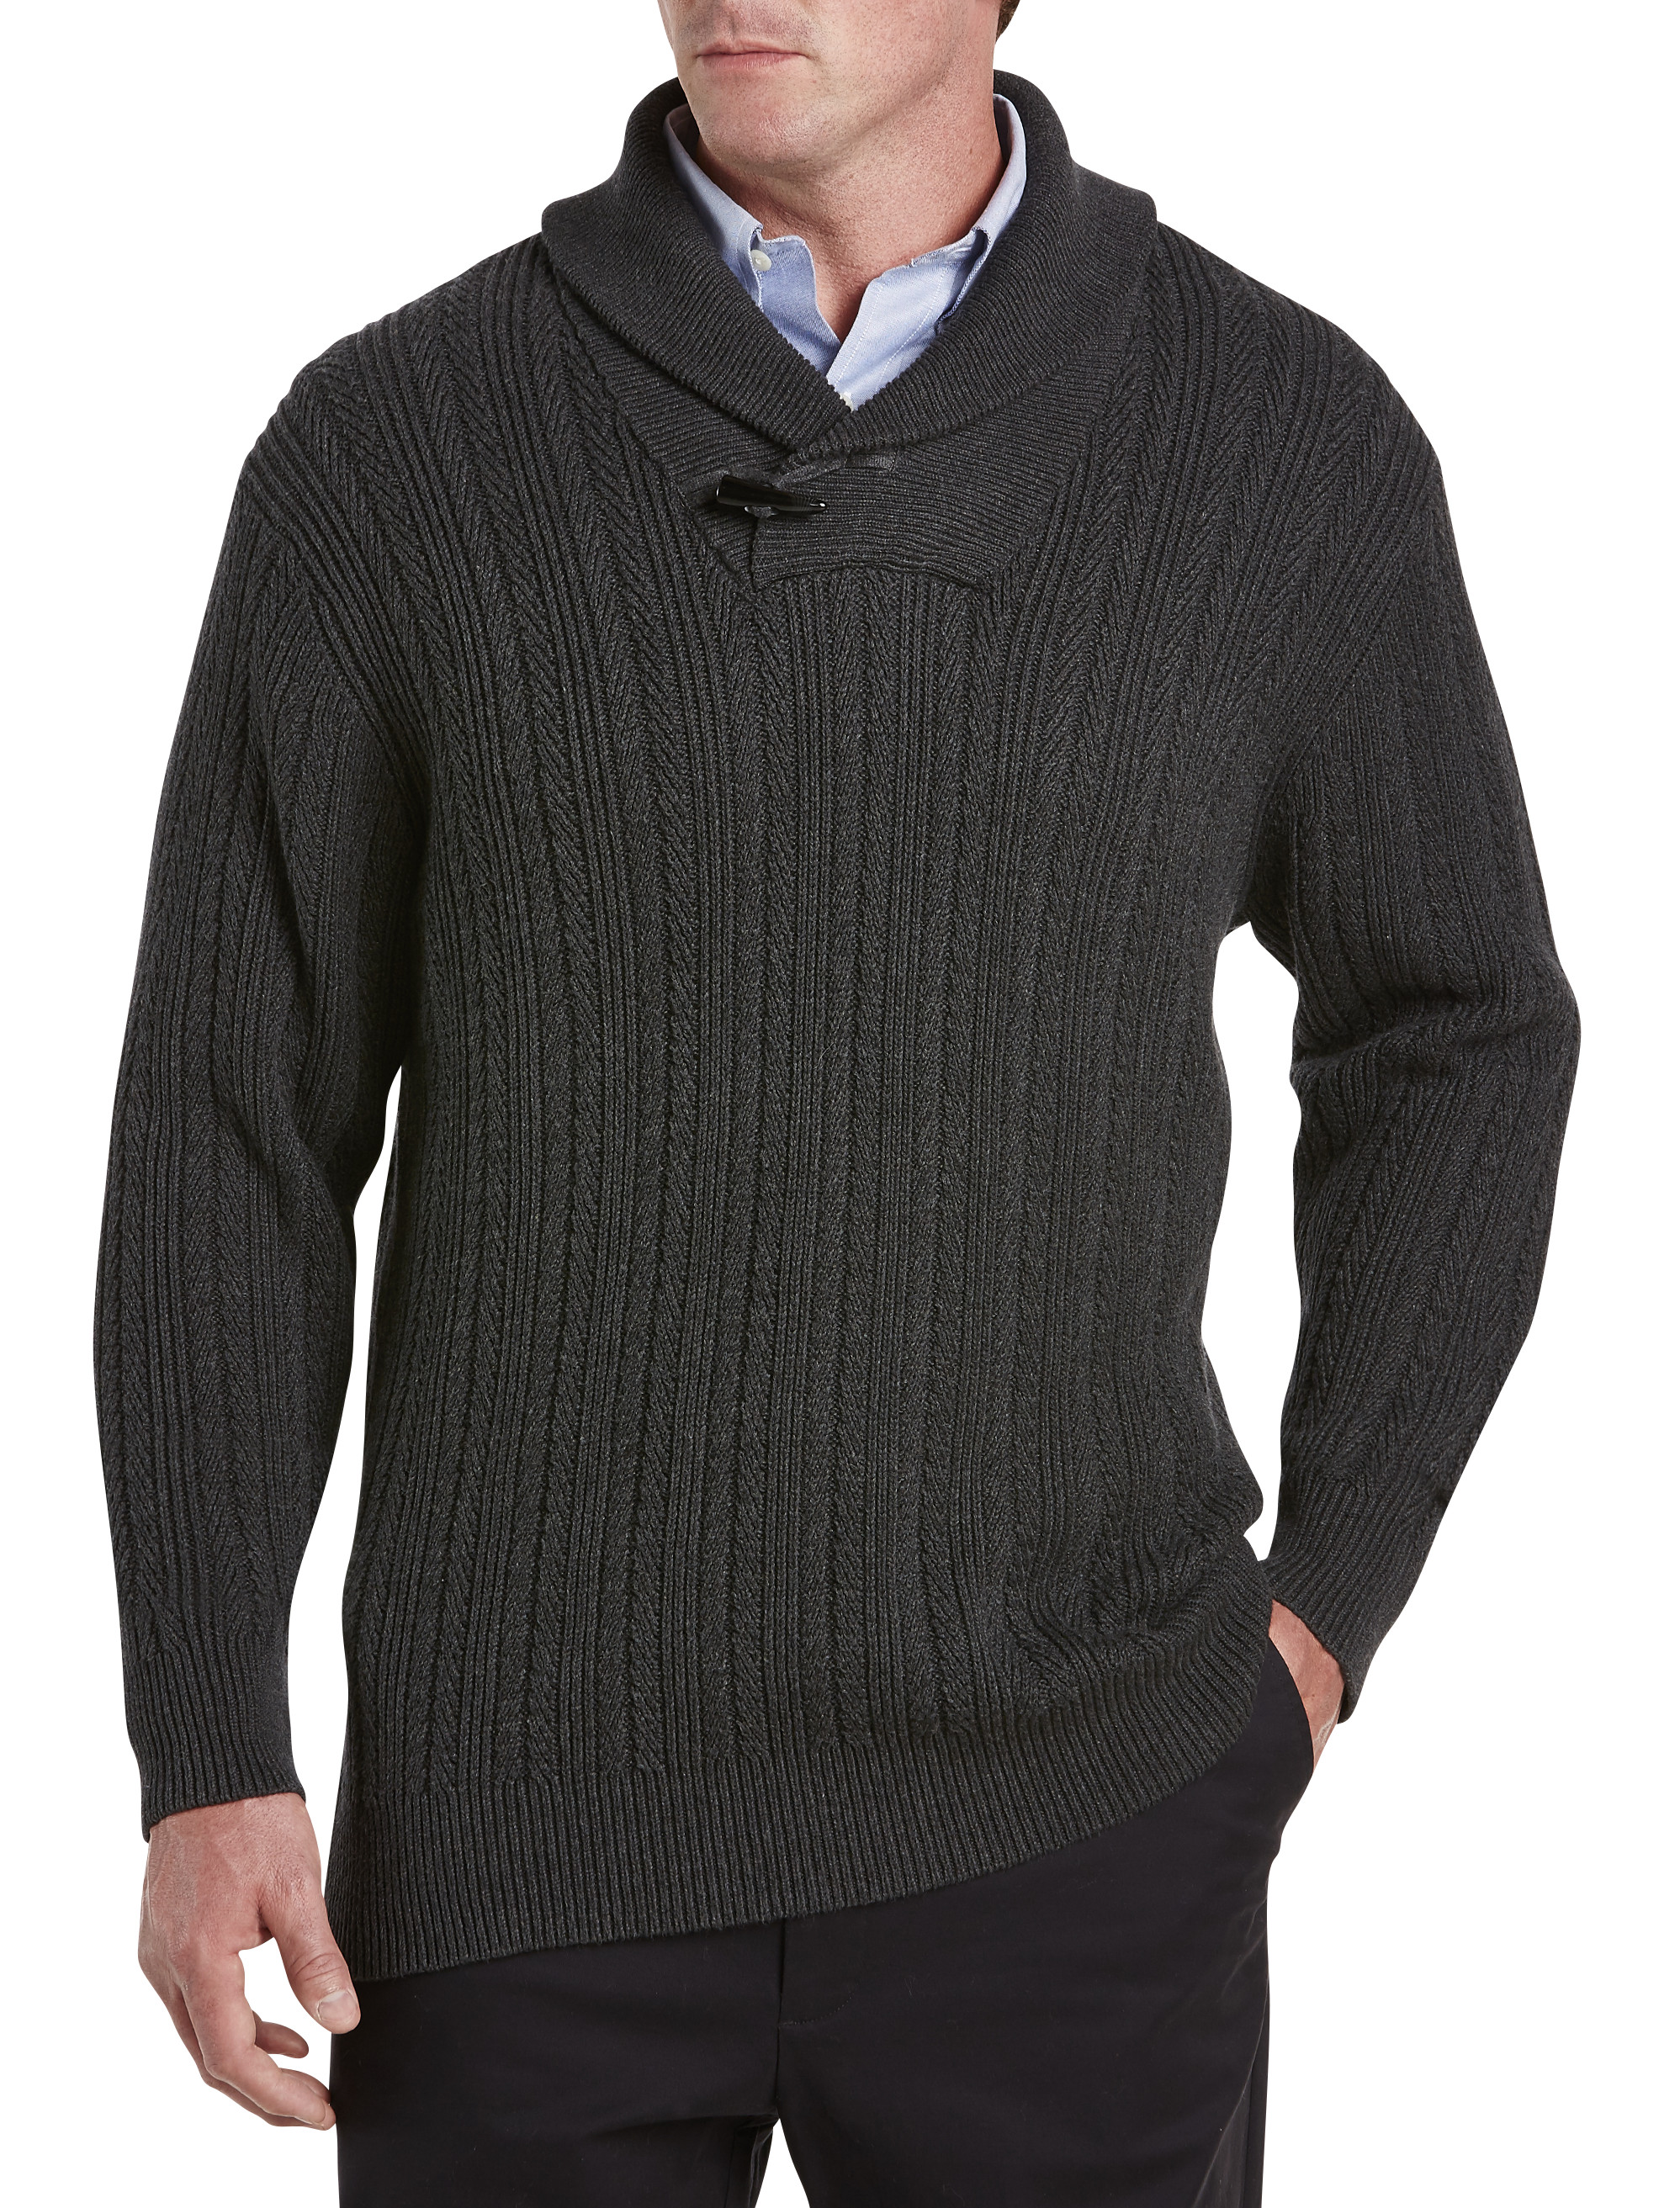 Designer Sweaters & Vests for Big and Tall Men | Casual Clothing